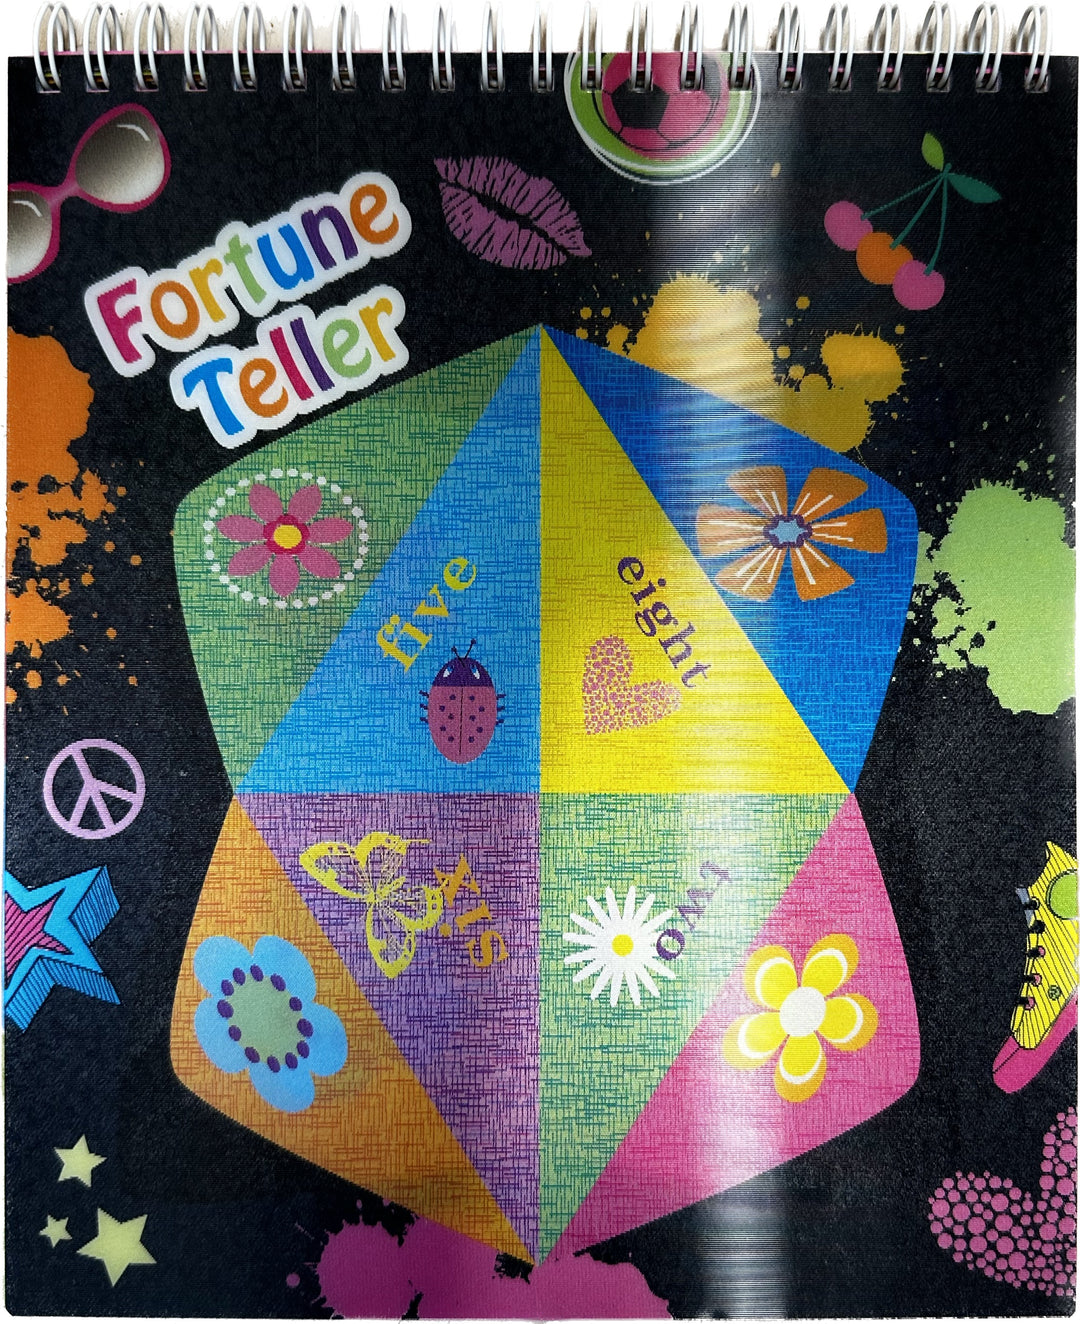 Fortune Tellers Activity Book